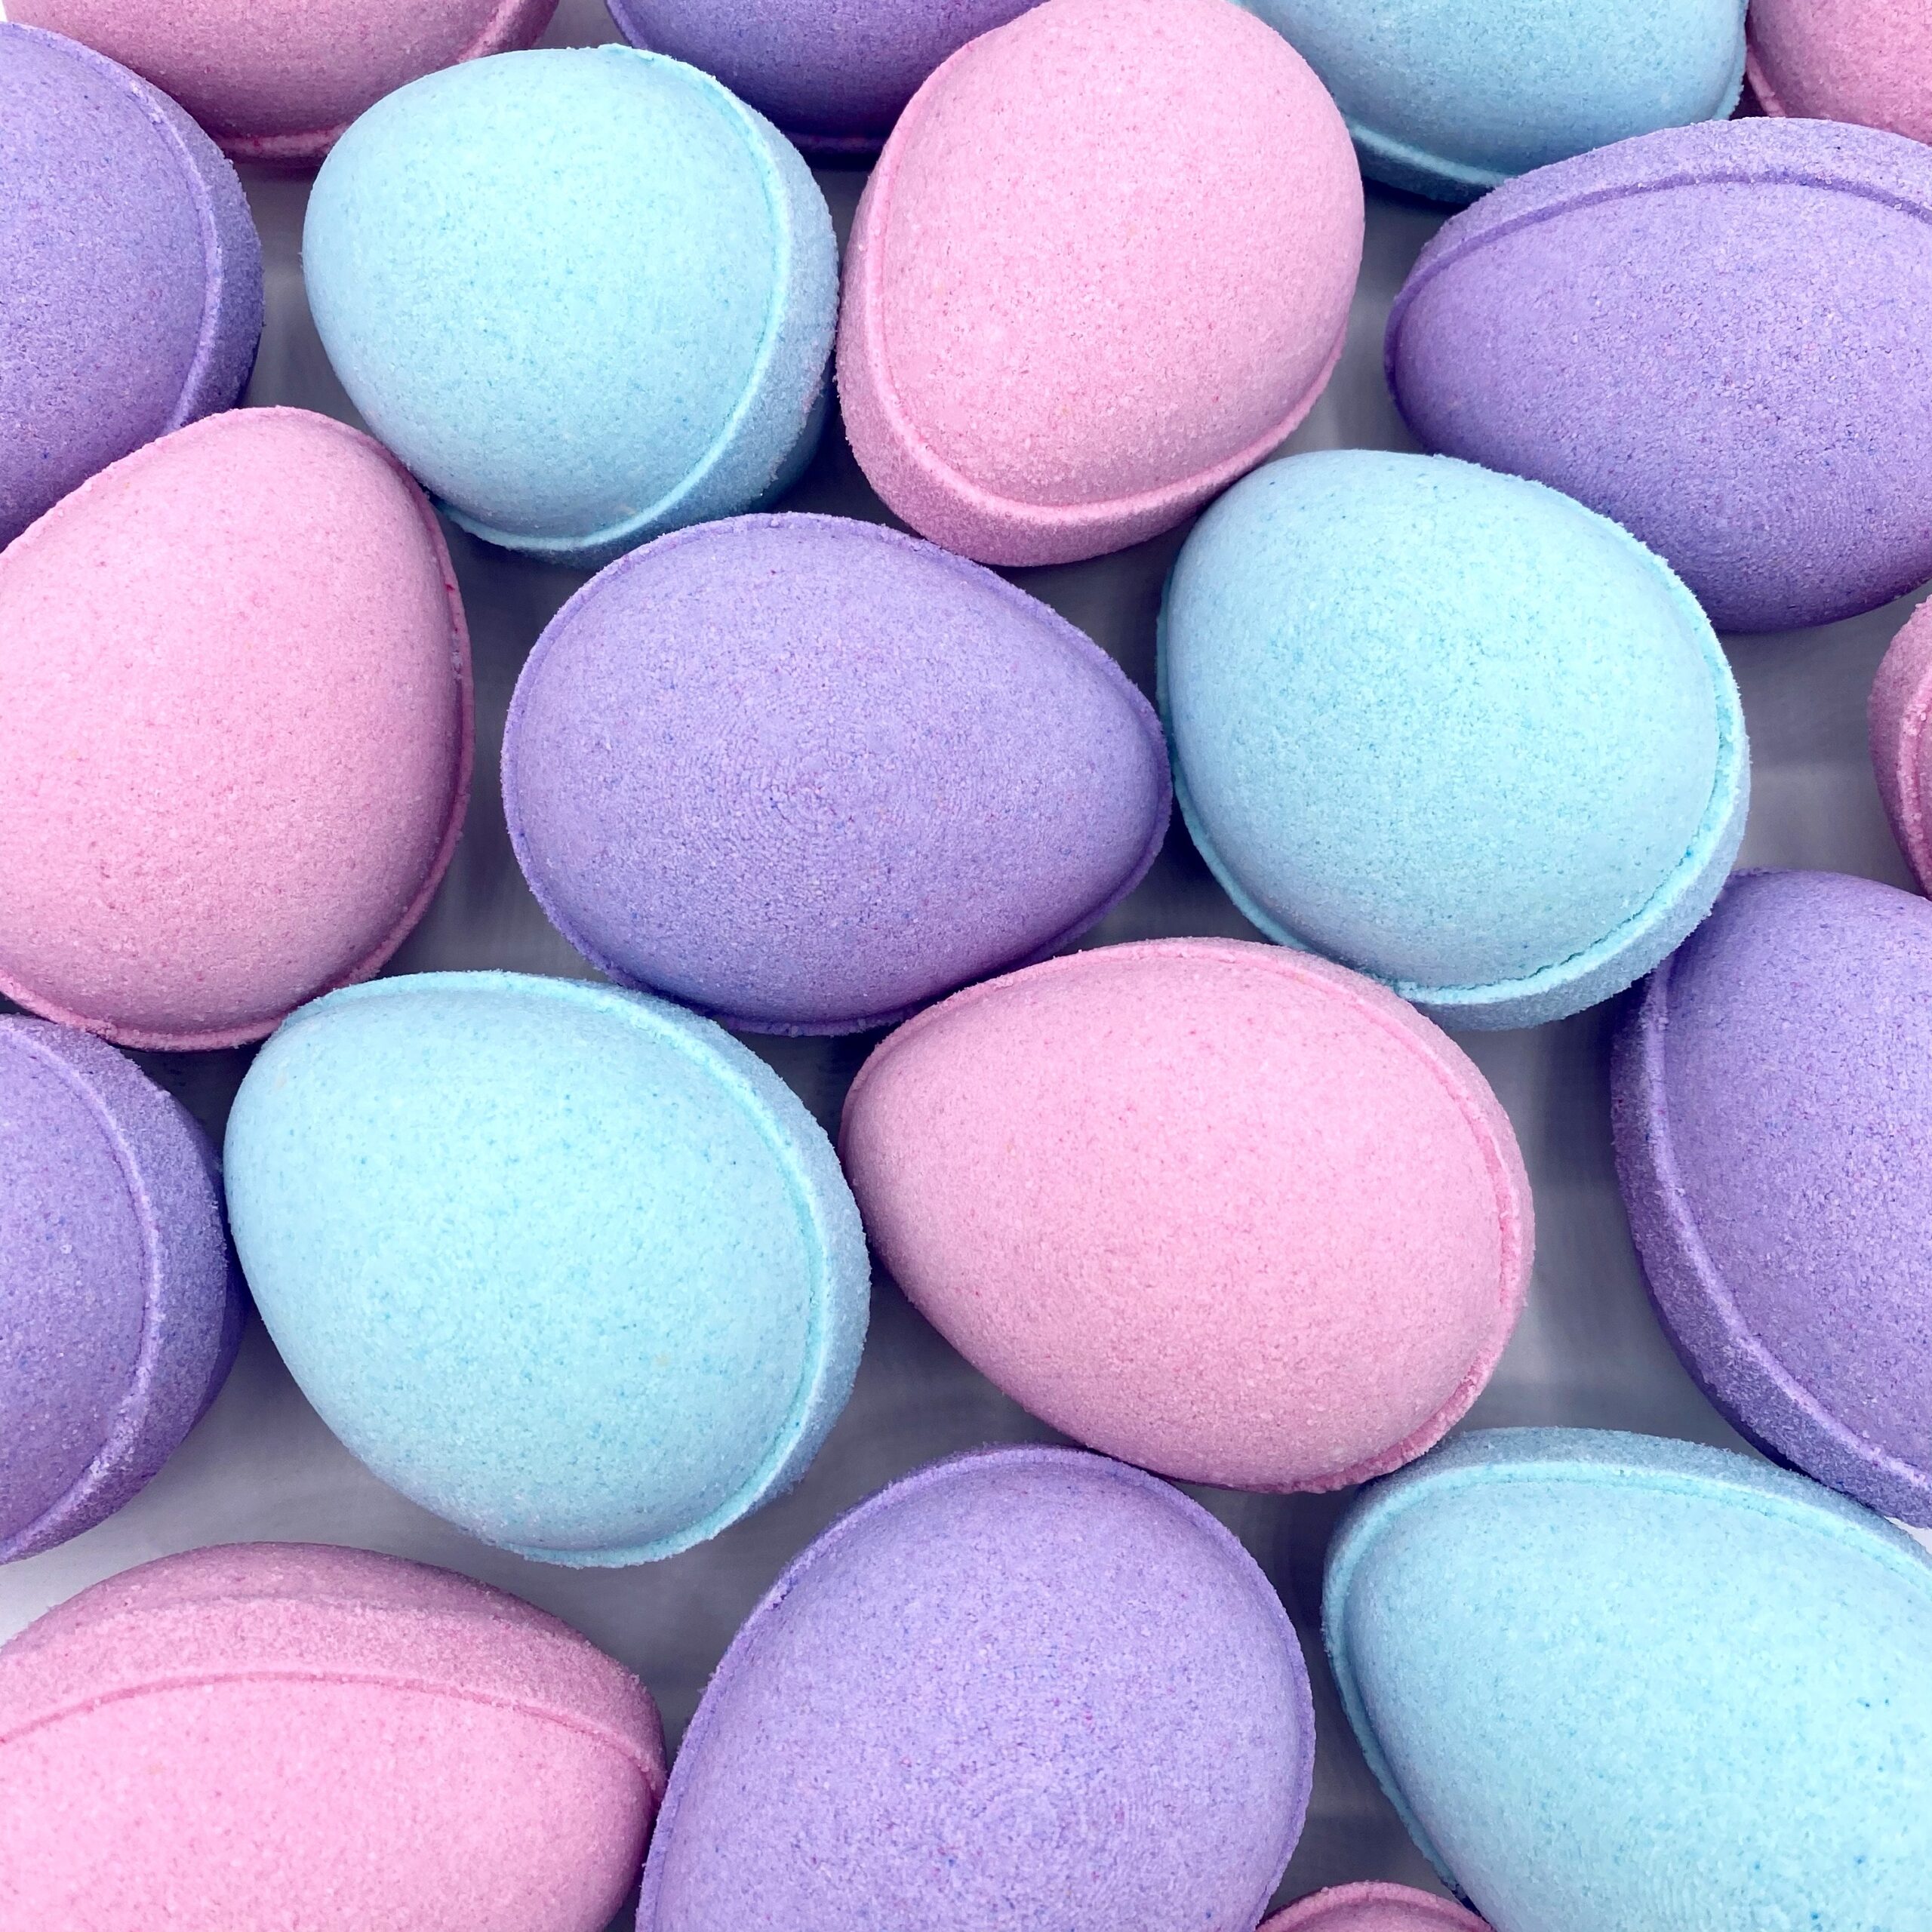 10 Must Have Mold Shapes for Your Bath Bombs